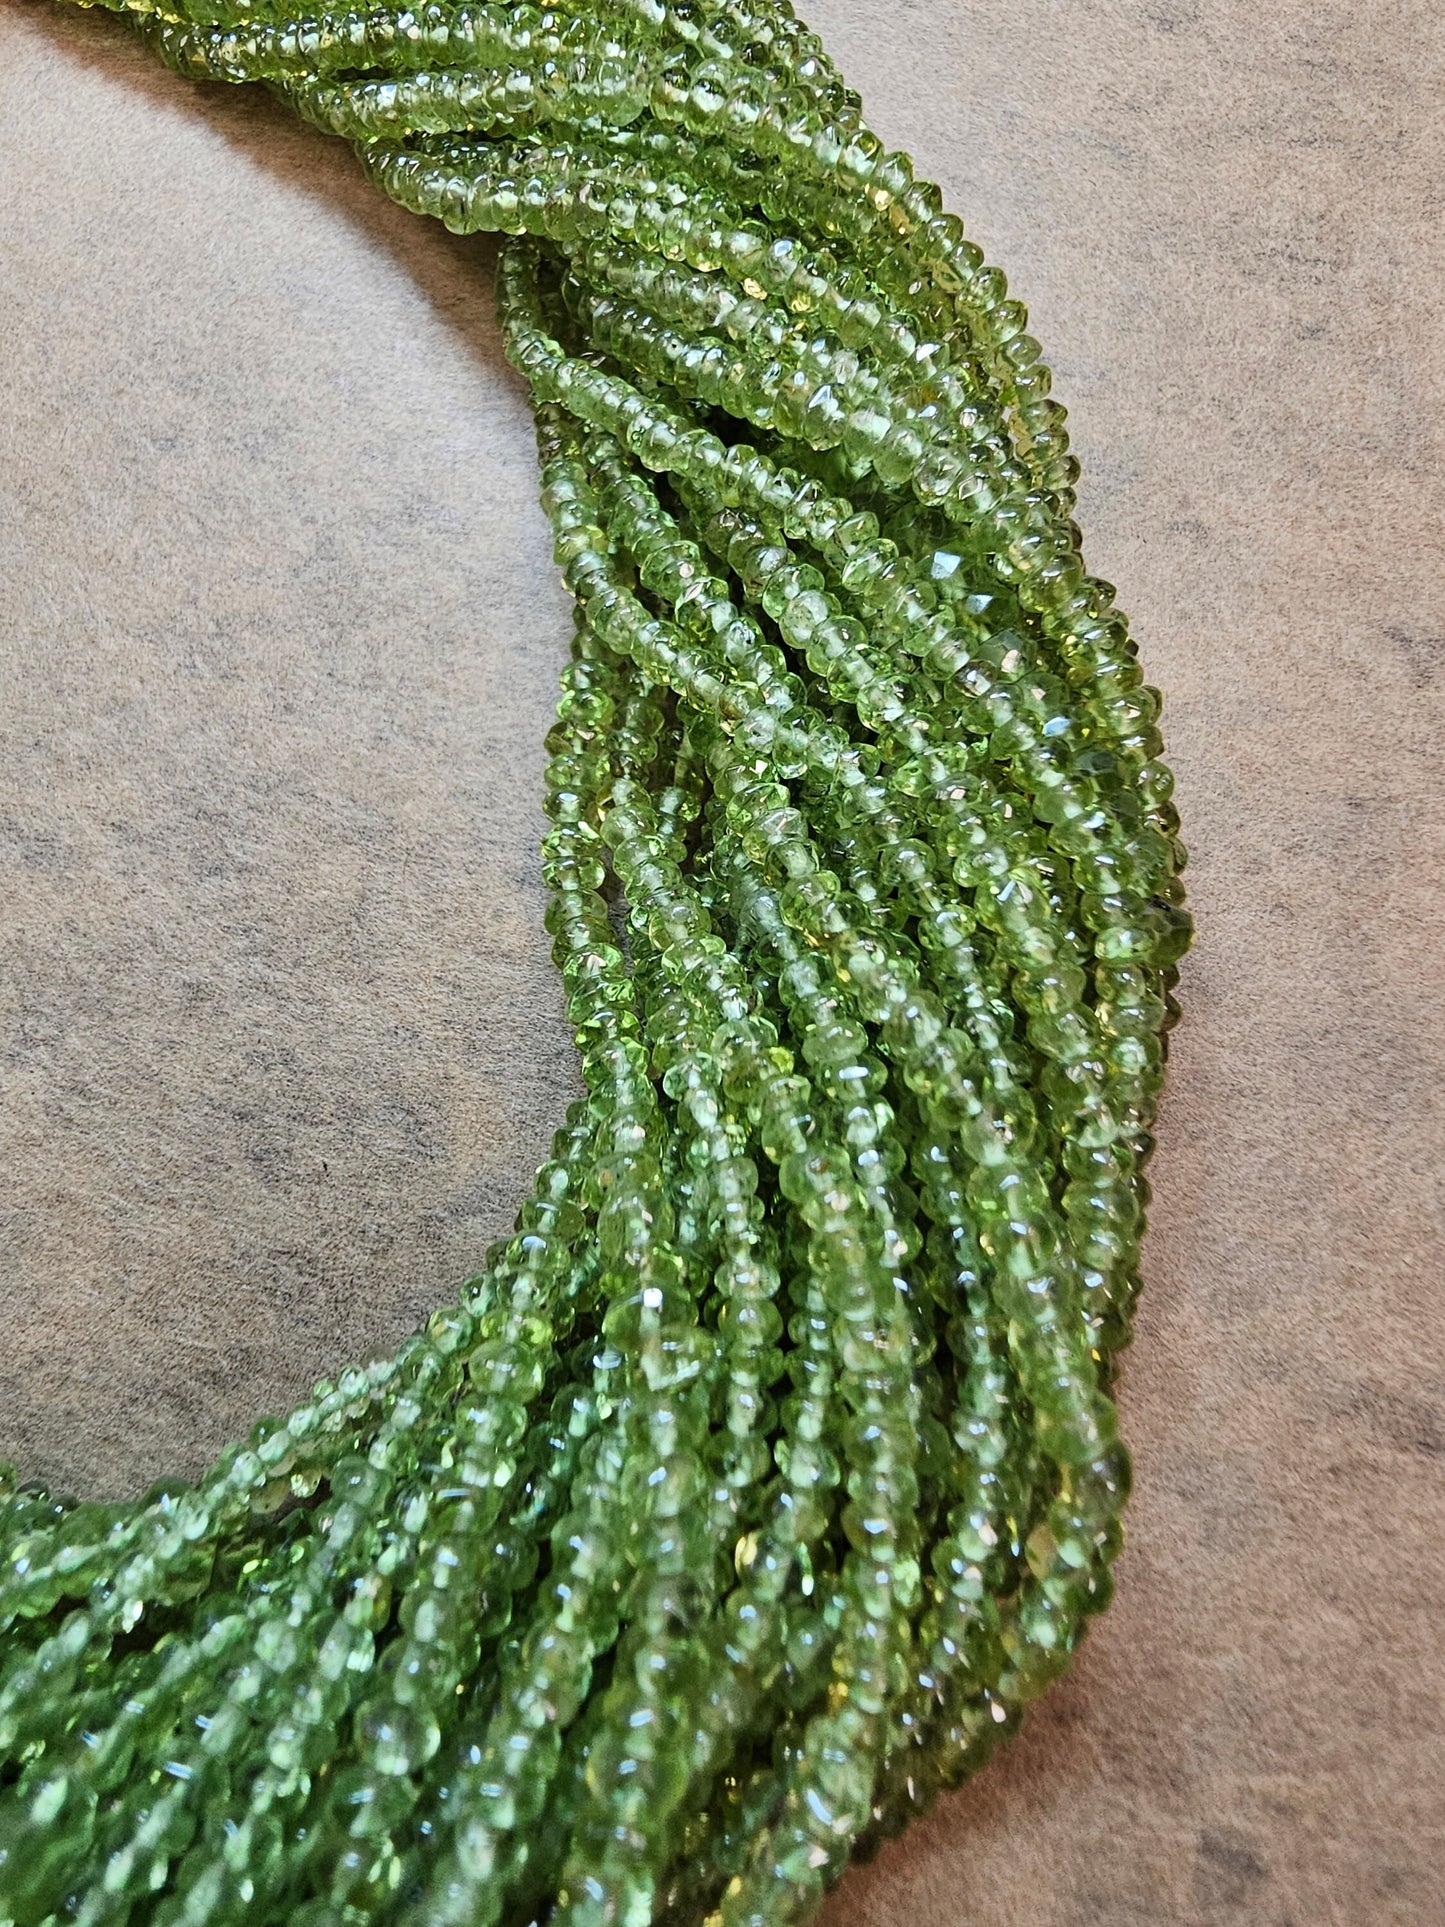 AA Peridot Gemstone Beads. Natural Rondelle Faceted Peridot Gemstone with strand length approx 14" Size 3-3.50, 3-4.50mm, 4-5mm